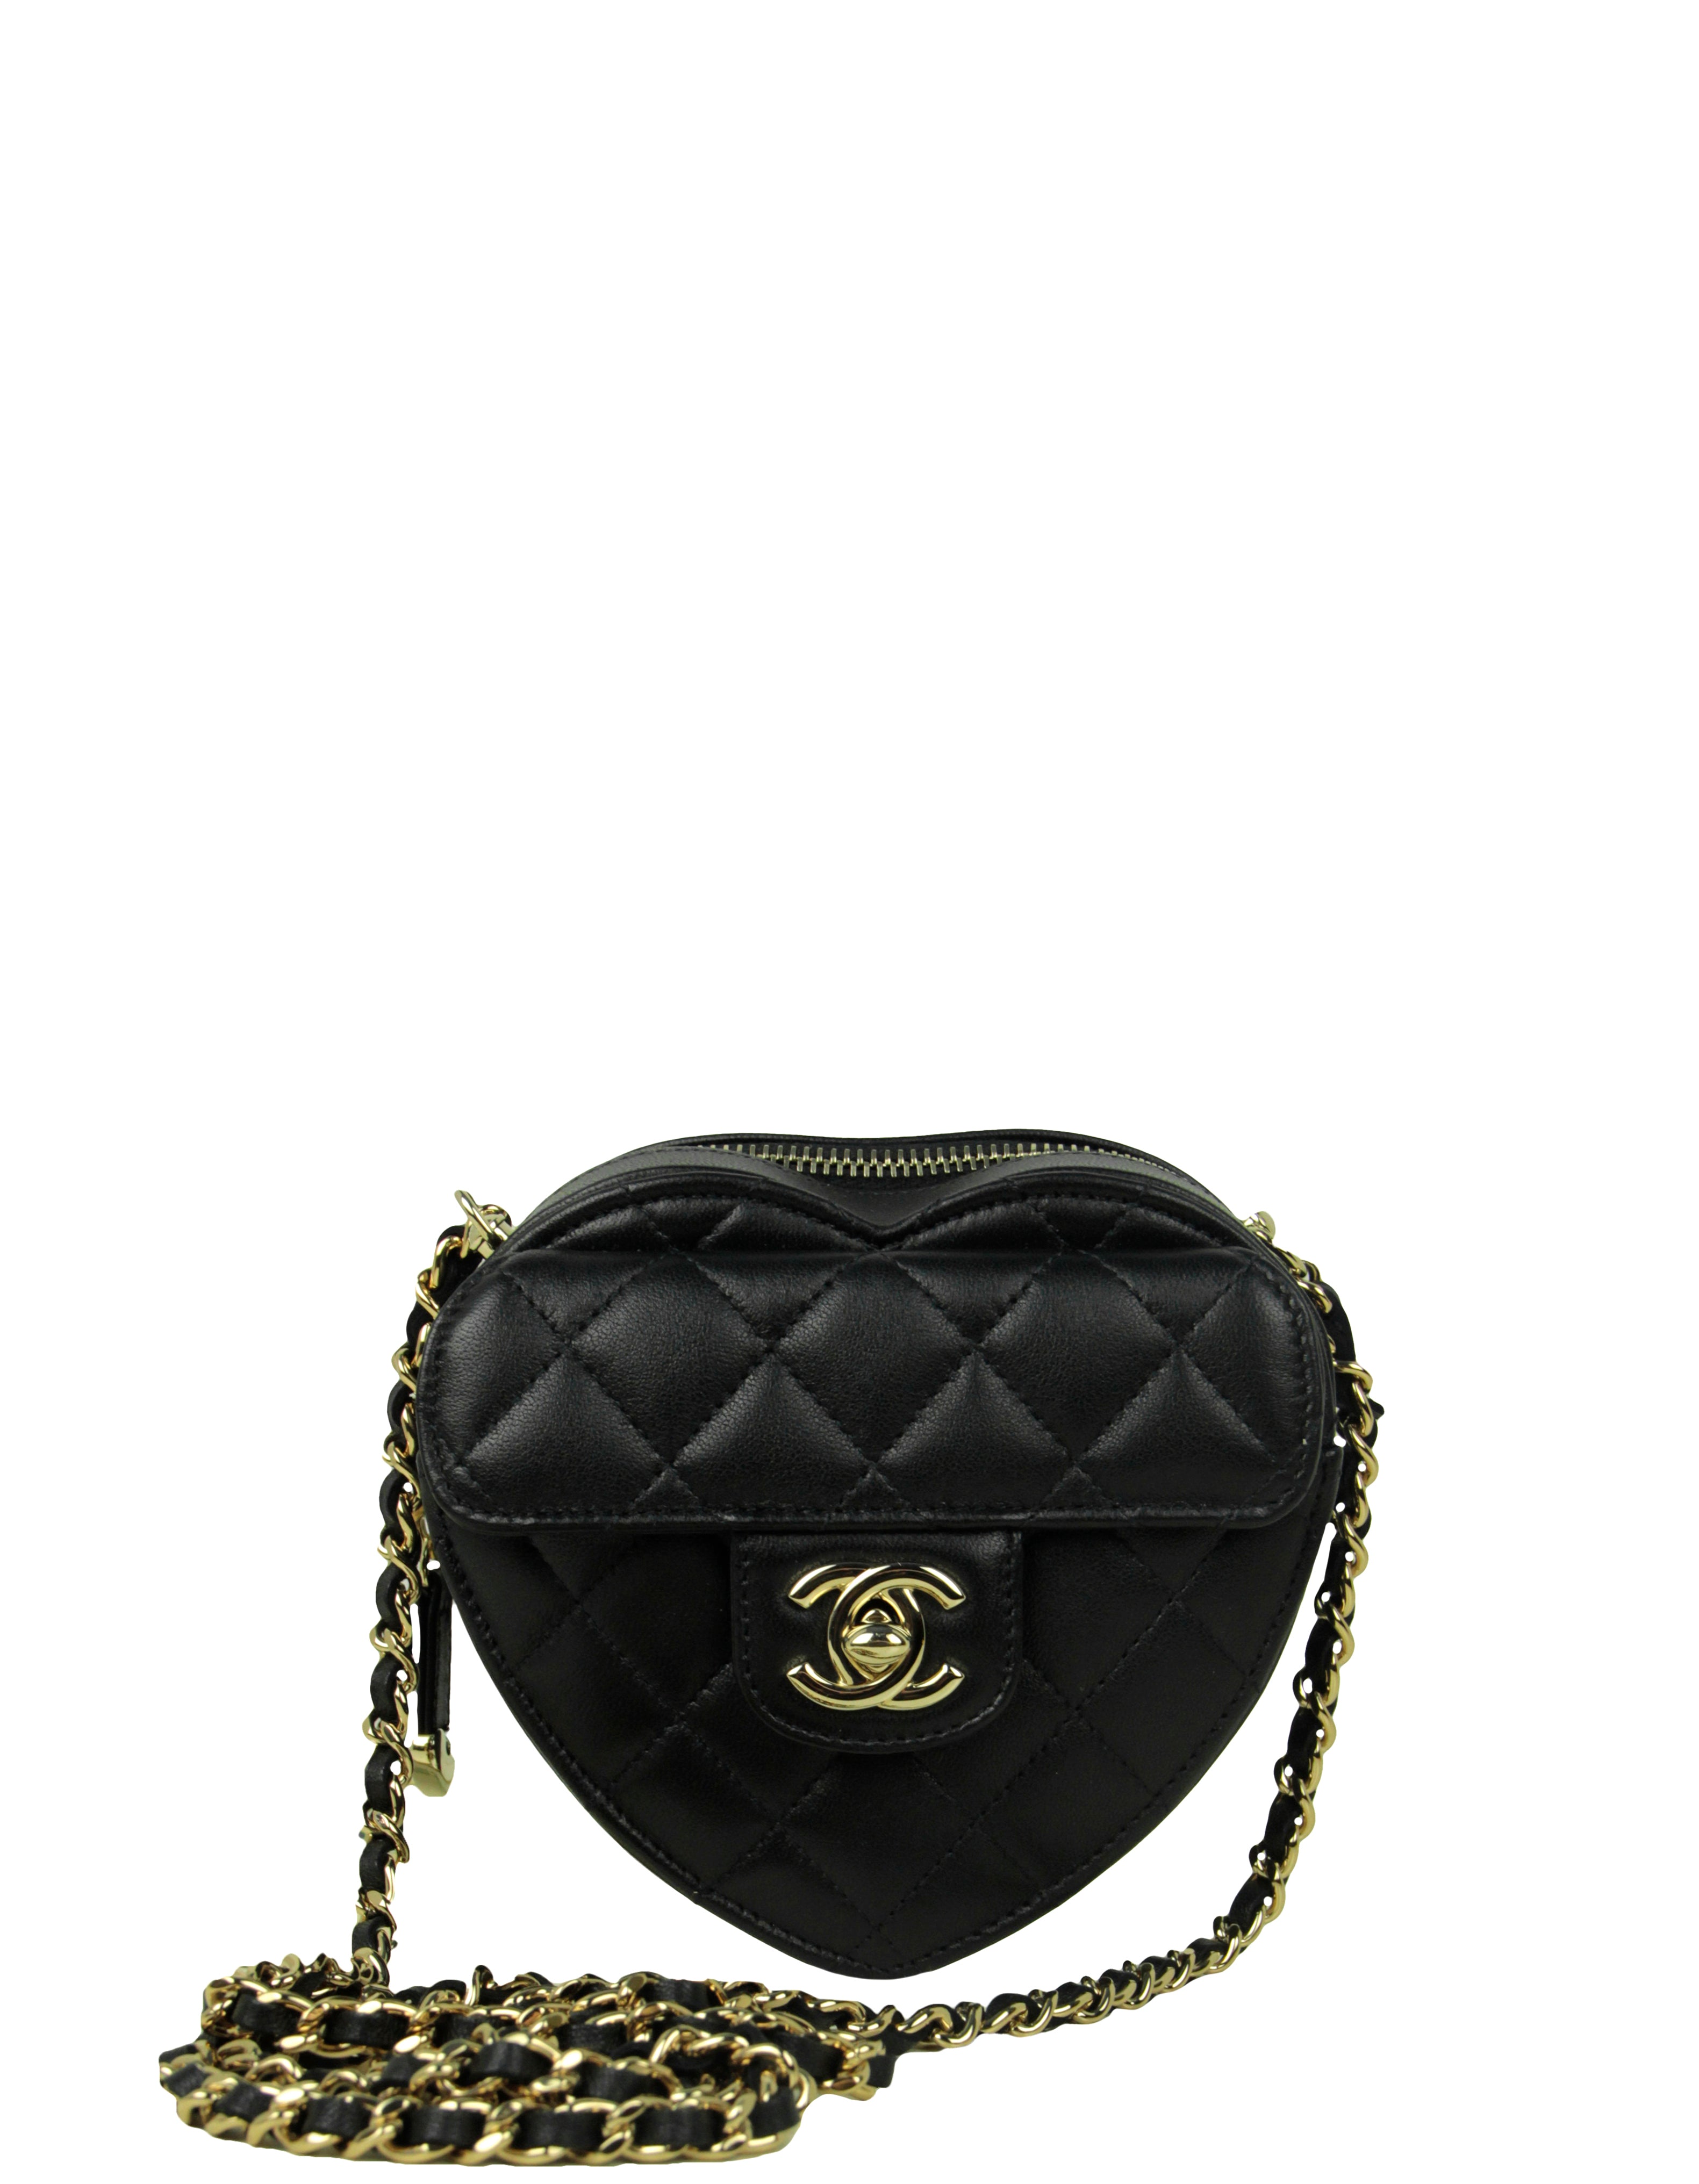 Chanel Black Lambskin Quilted CC In Love Heart Clutch Bag With Chain